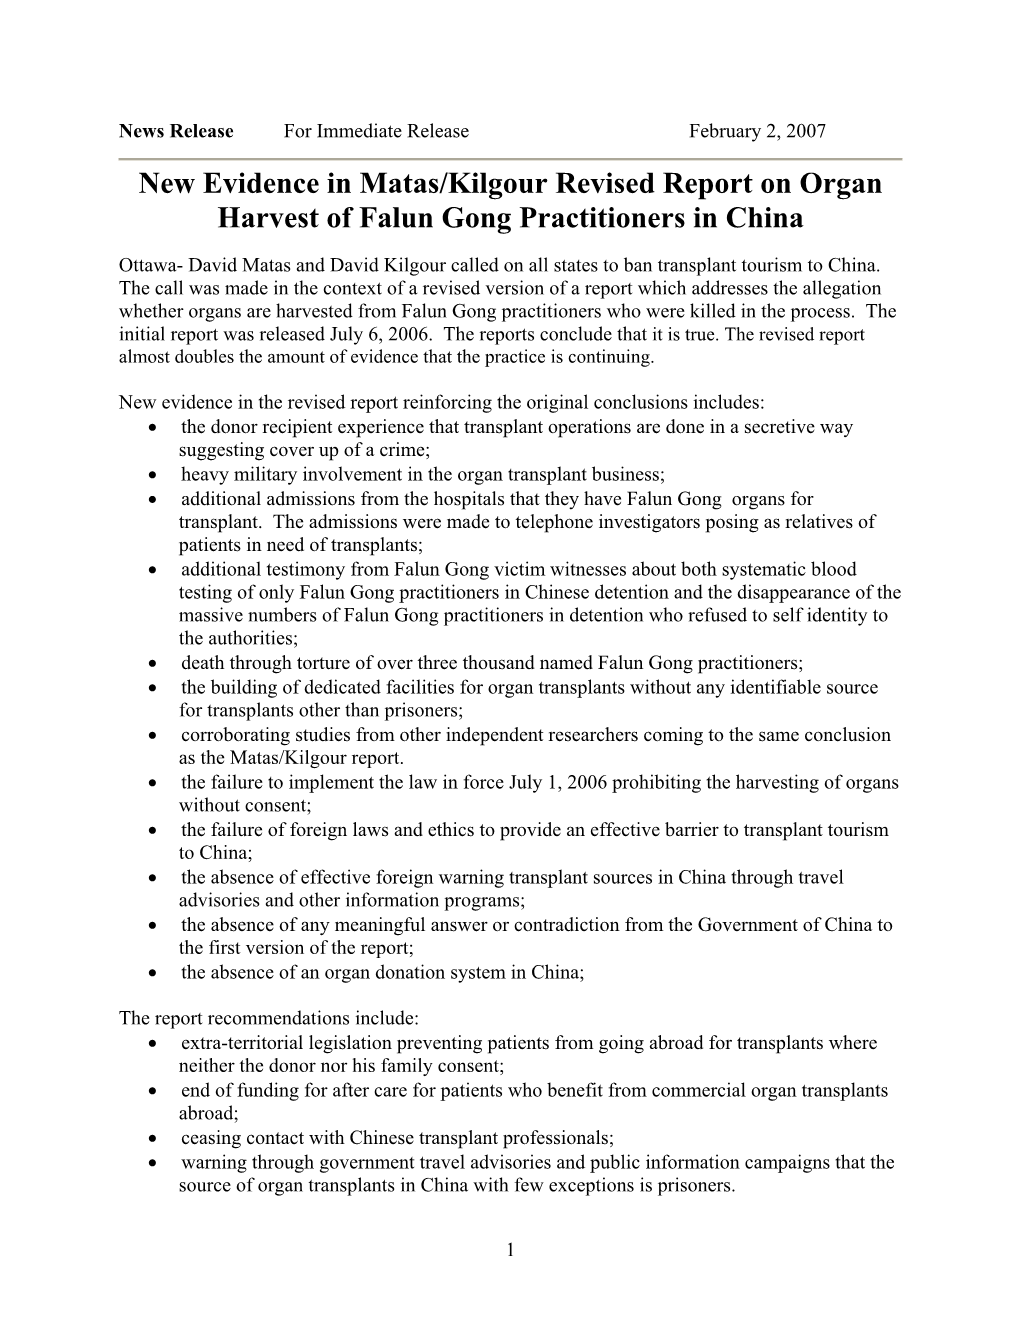 New Evidence in Matas/Kilgour Revised Report on Organ Harvest of Falun Gong Practitioners in China